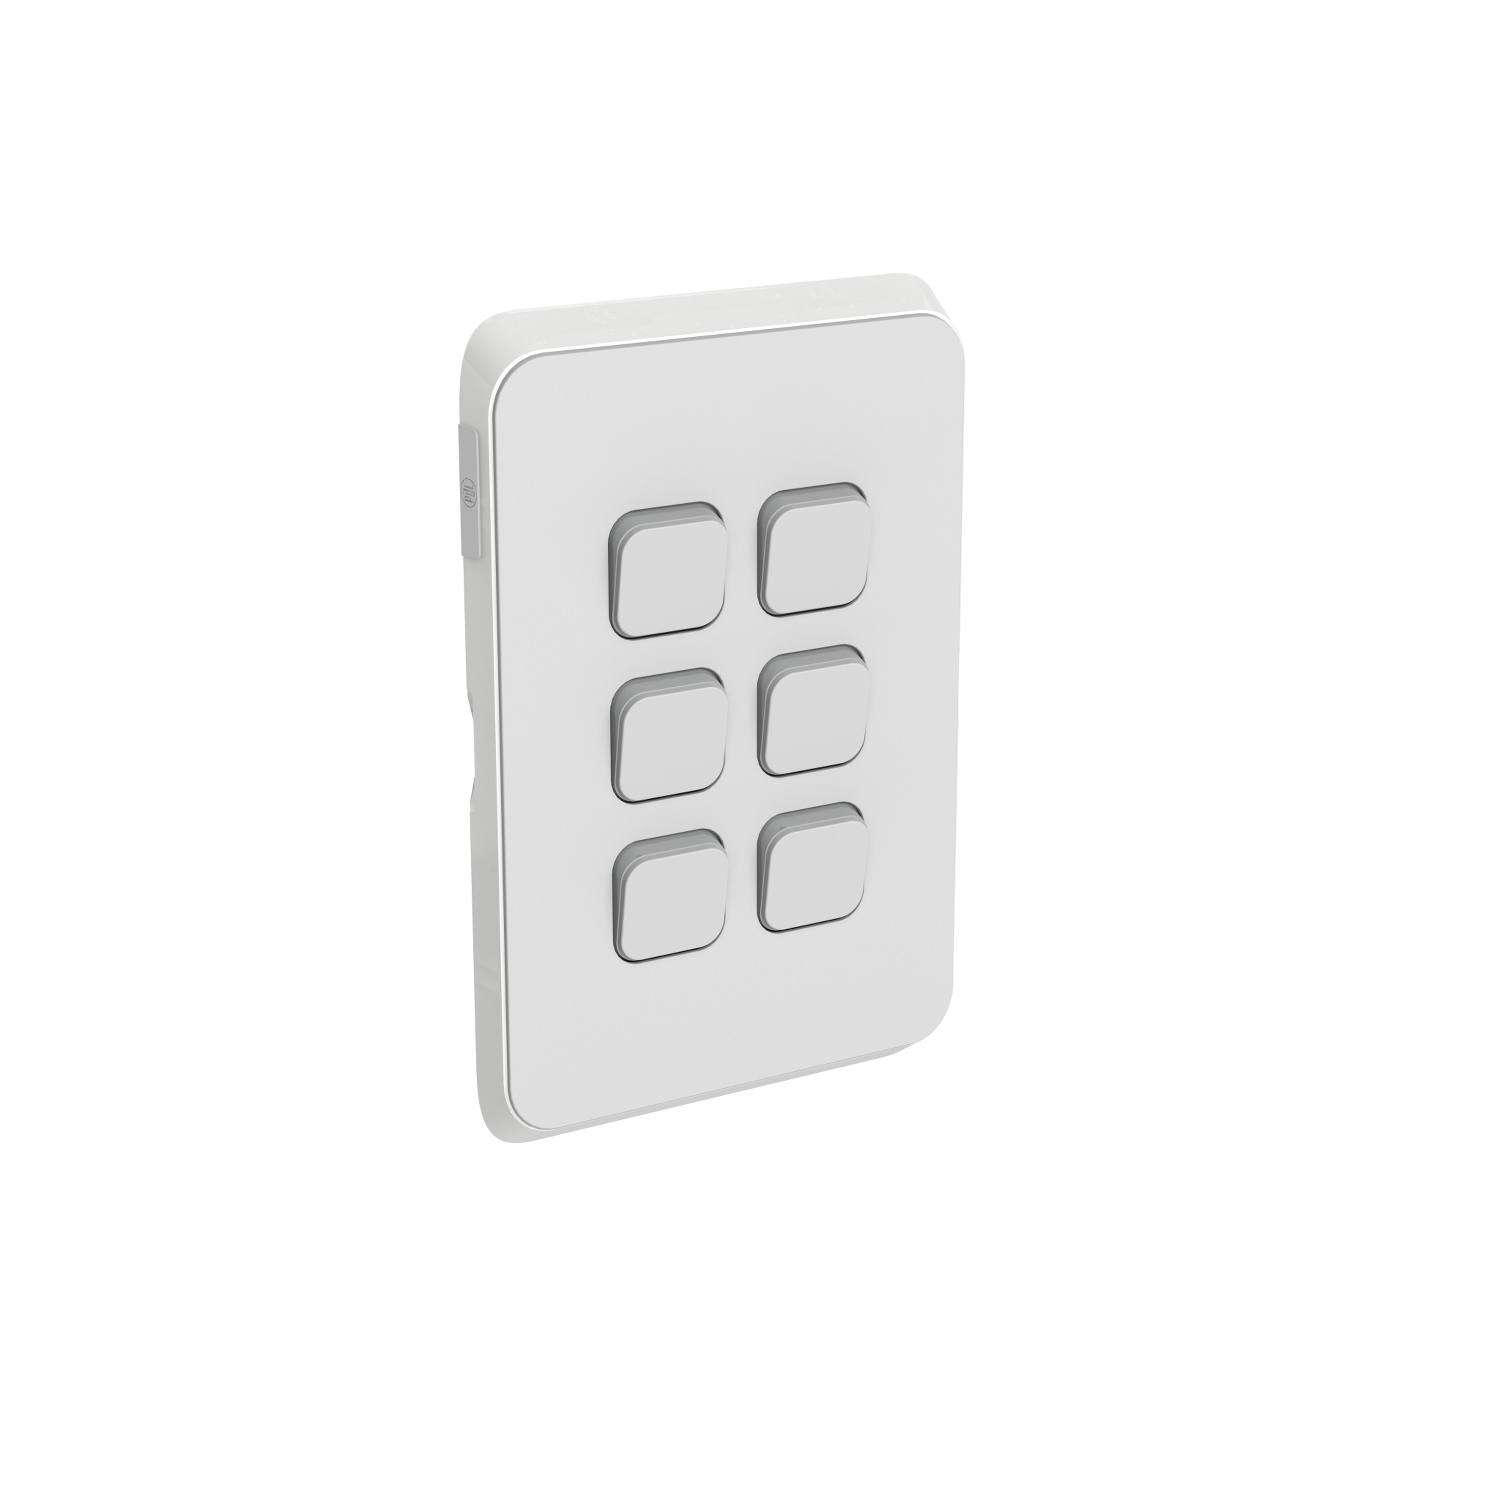 PDL386C-CY - PDL Iconic Cover Plate Switch 6Gang - Cool Grey